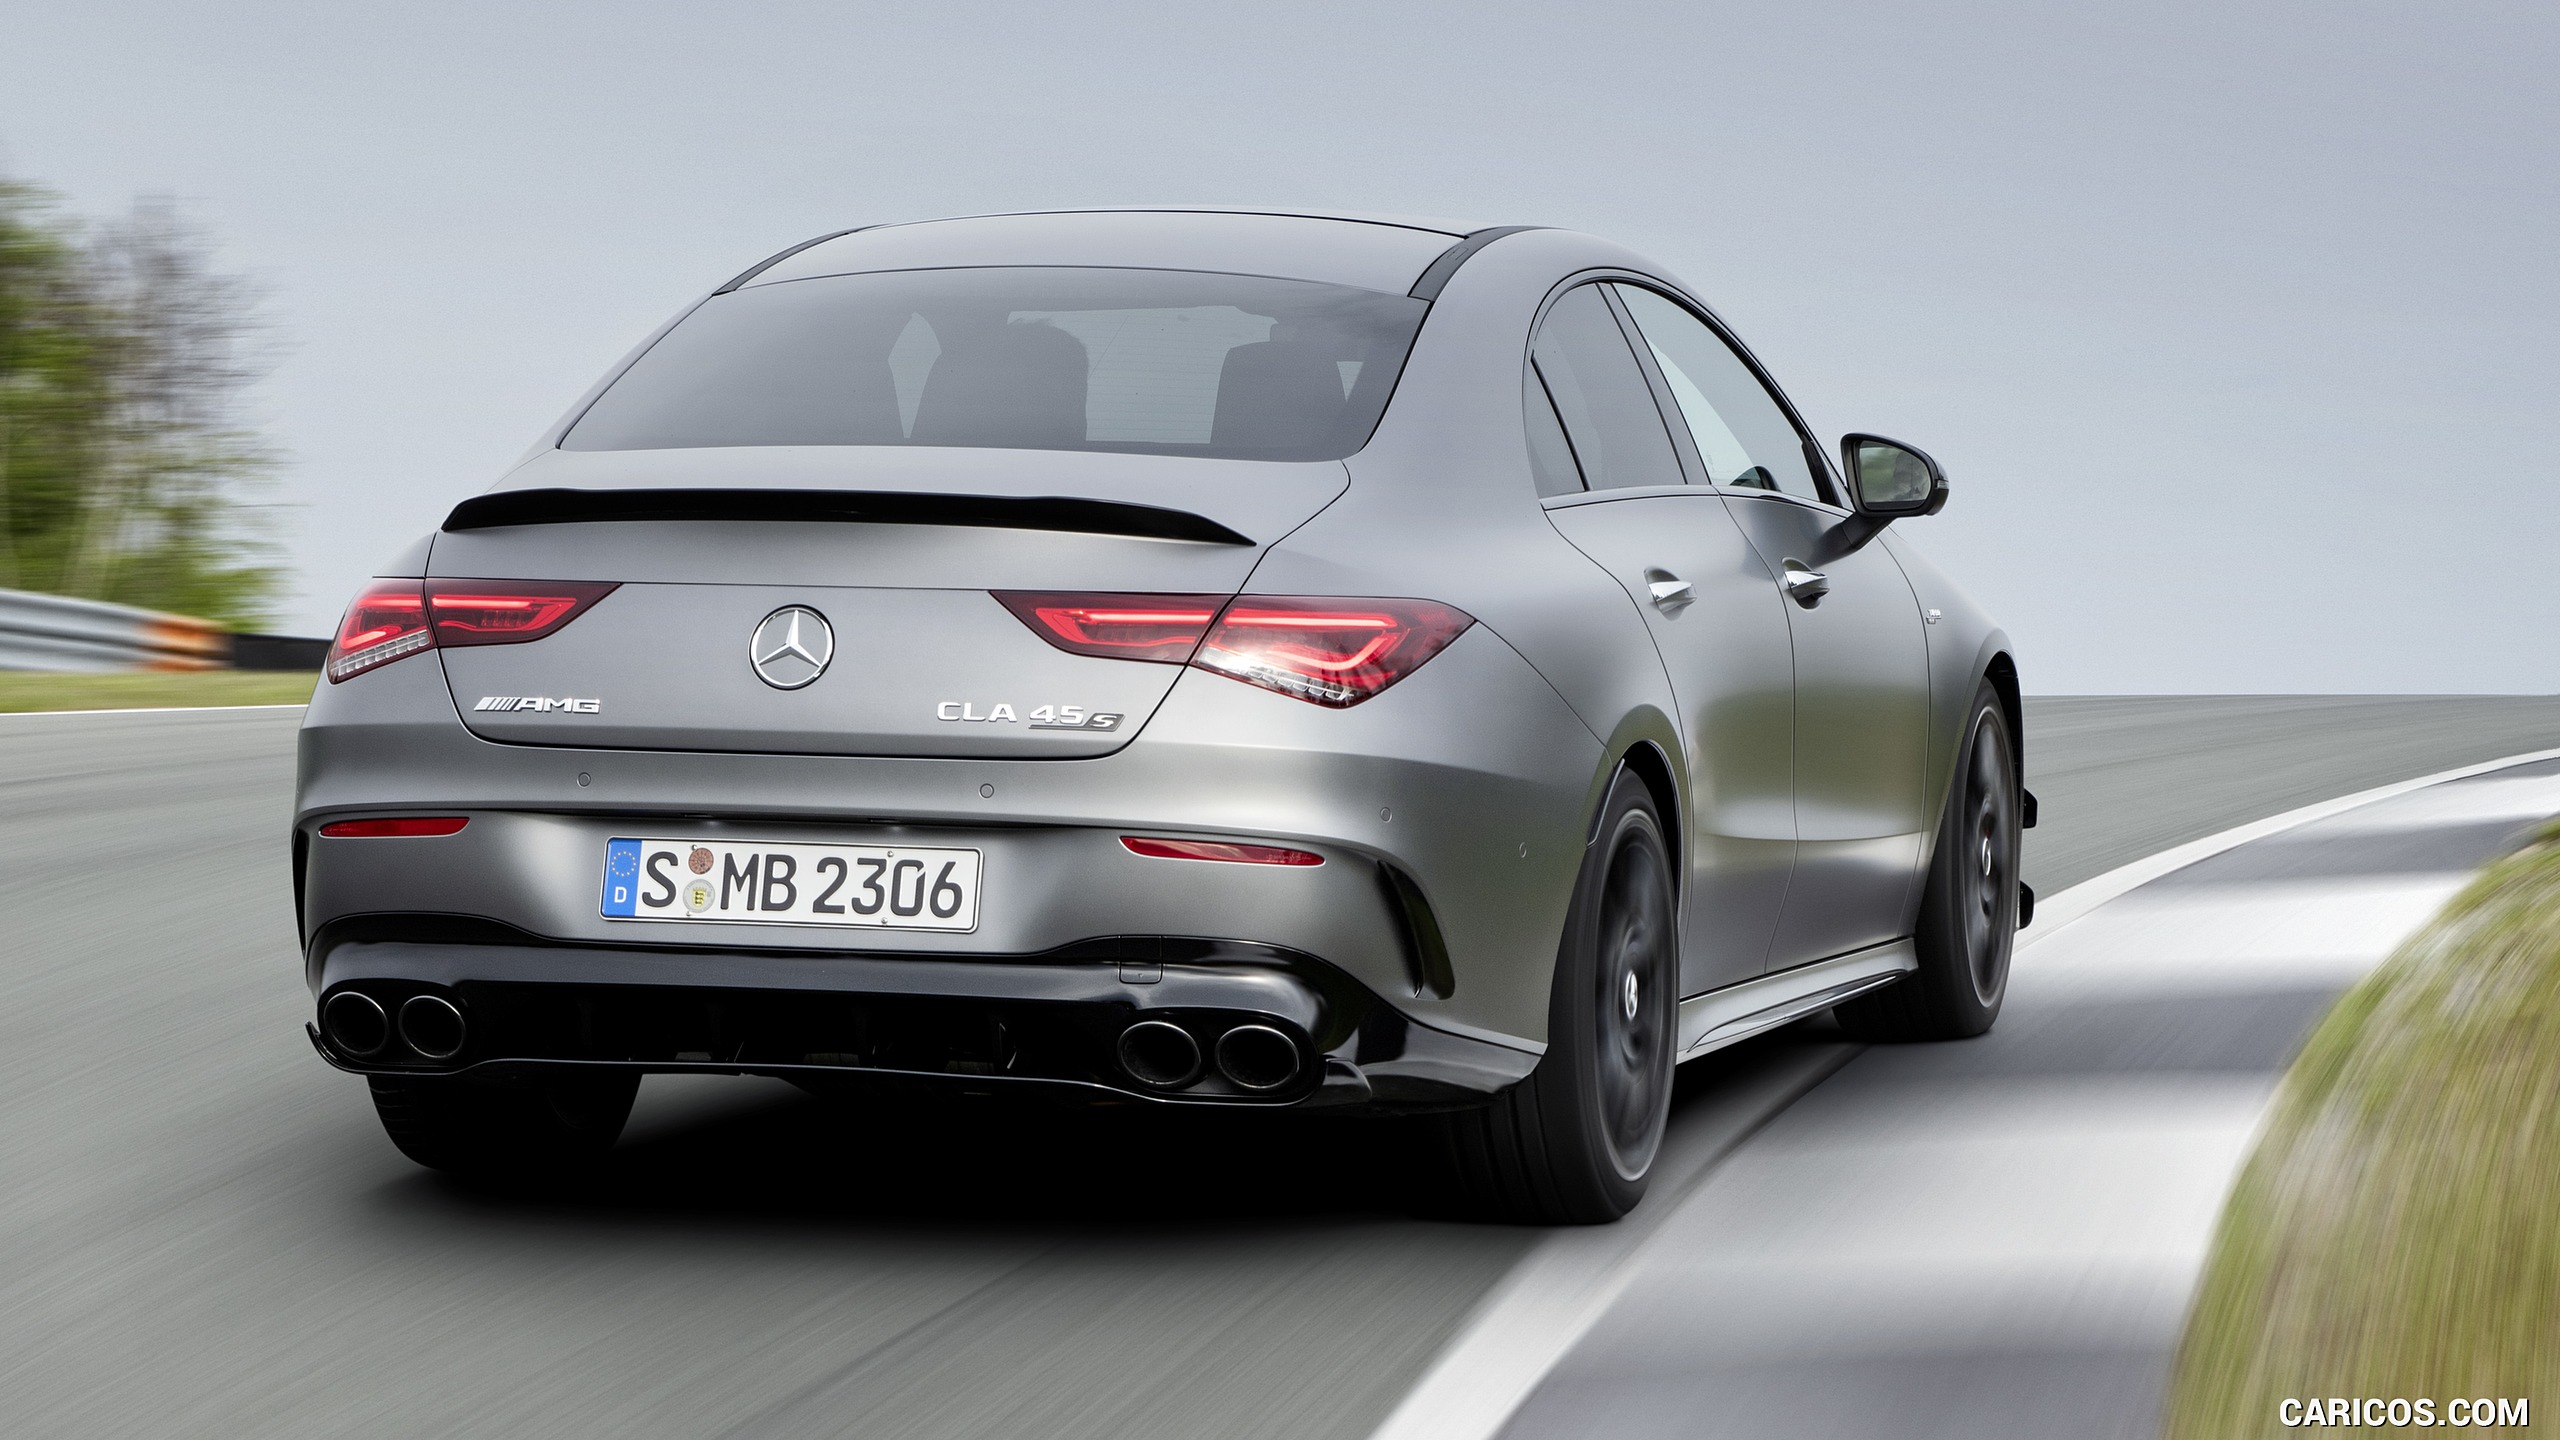 2020 Mercedes-AMG CLA 45 S 4MATIC+ - Rear, #16 of 159